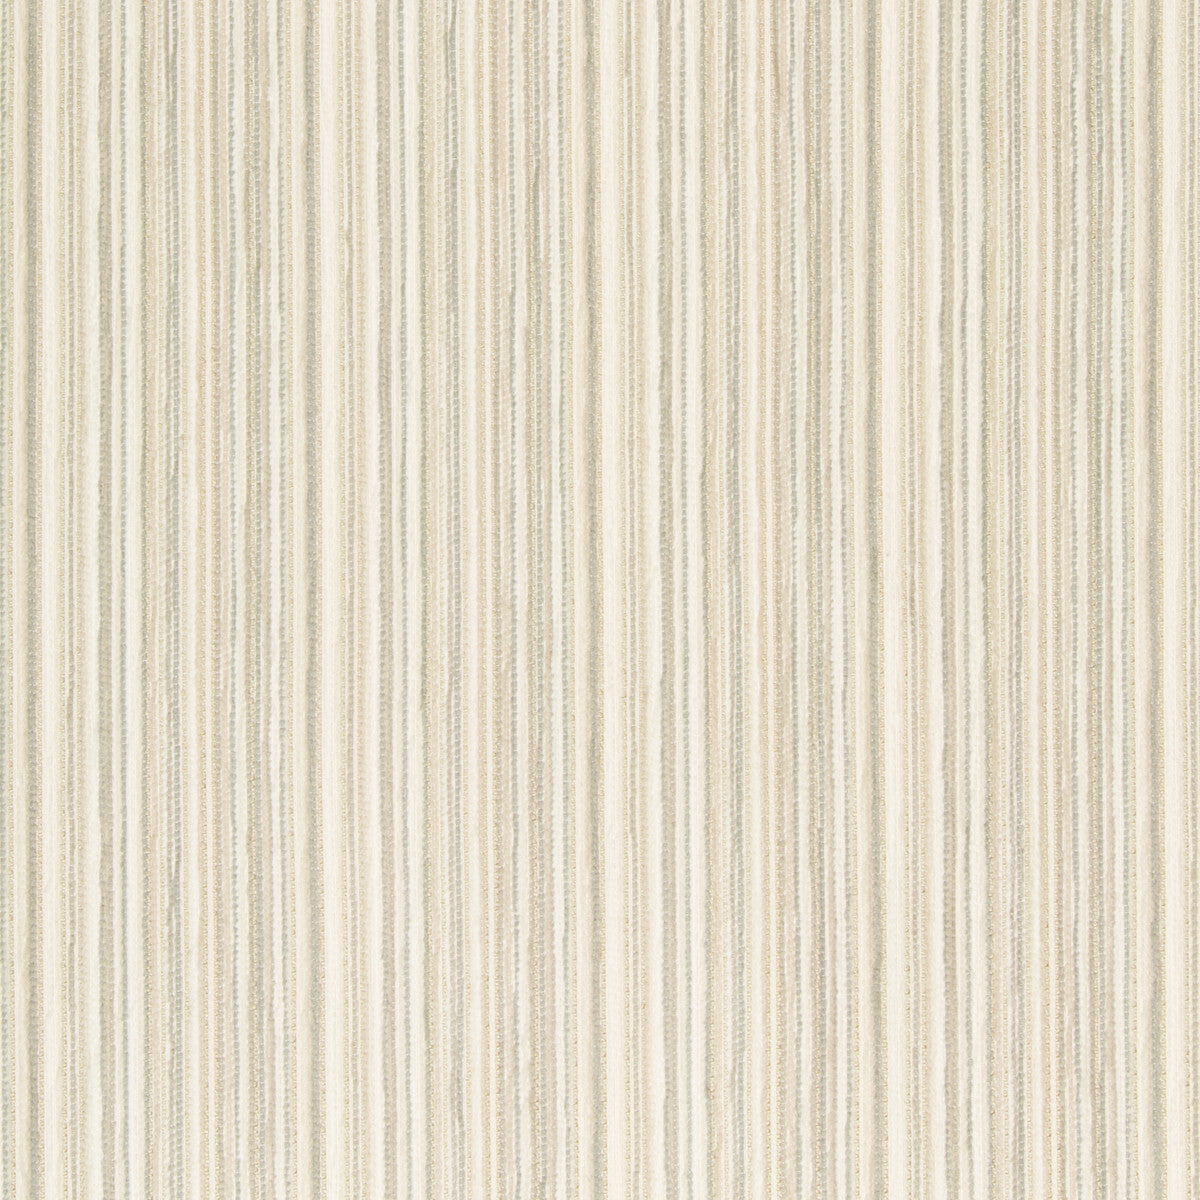 Kravet Contract fabric in 34740-1611 color - pattern 34740.1611.0 - by Kravet Contract in the Incase Crypton Gis collection